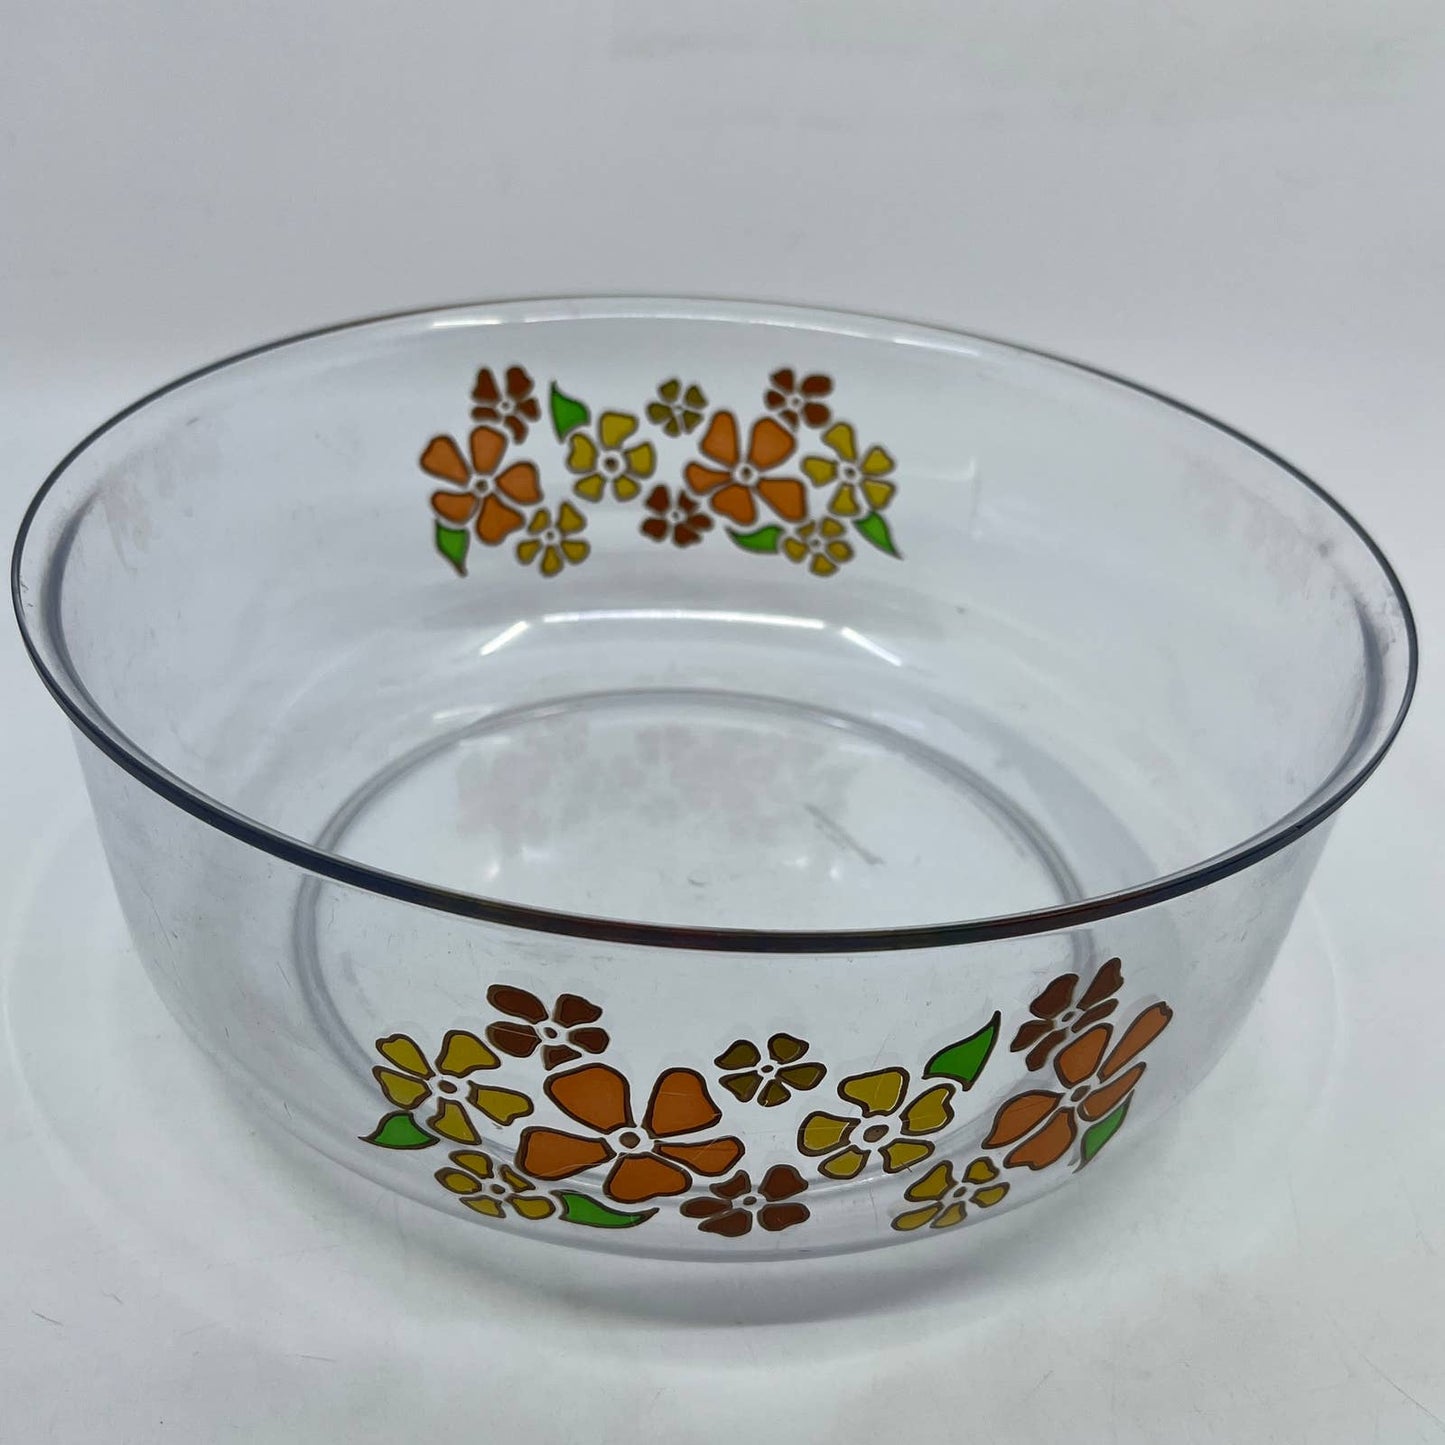 1970s Retro Thermoserv 16 Cup Store and Serve Mixing Serving Popcorn Bowl TI1